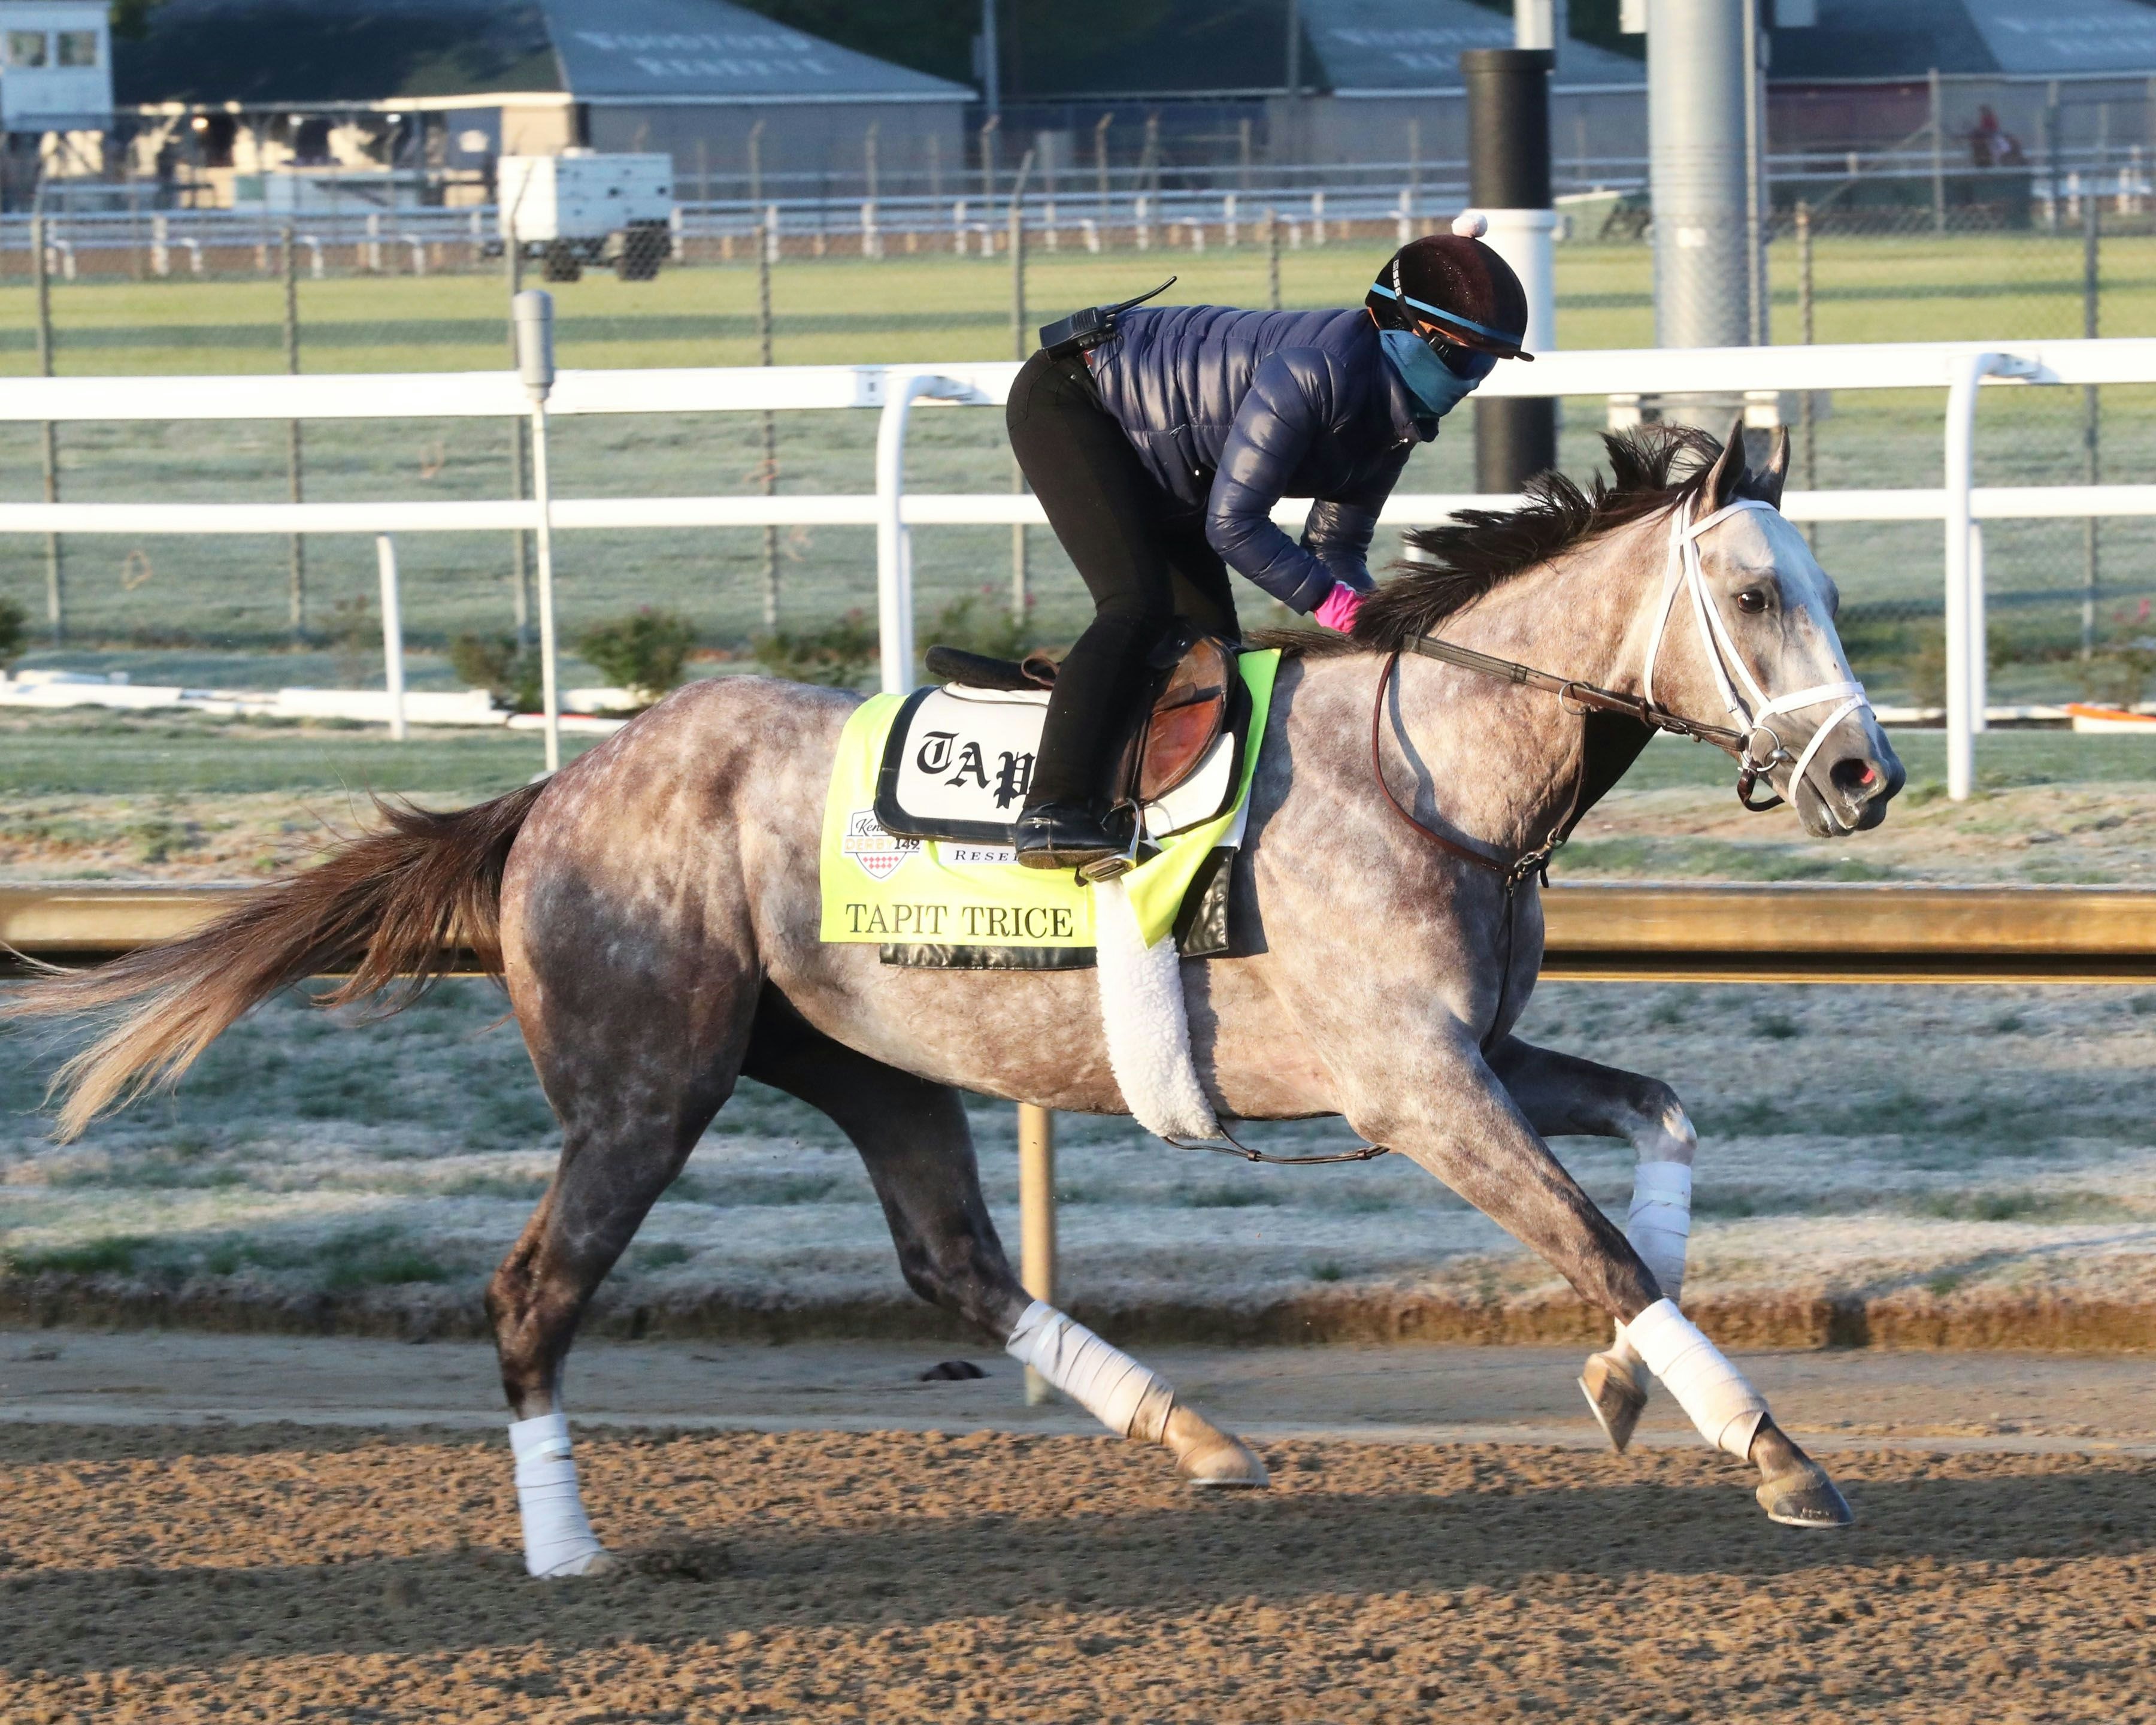 Reviewing the final workouts of Kentucky Derby contenders The